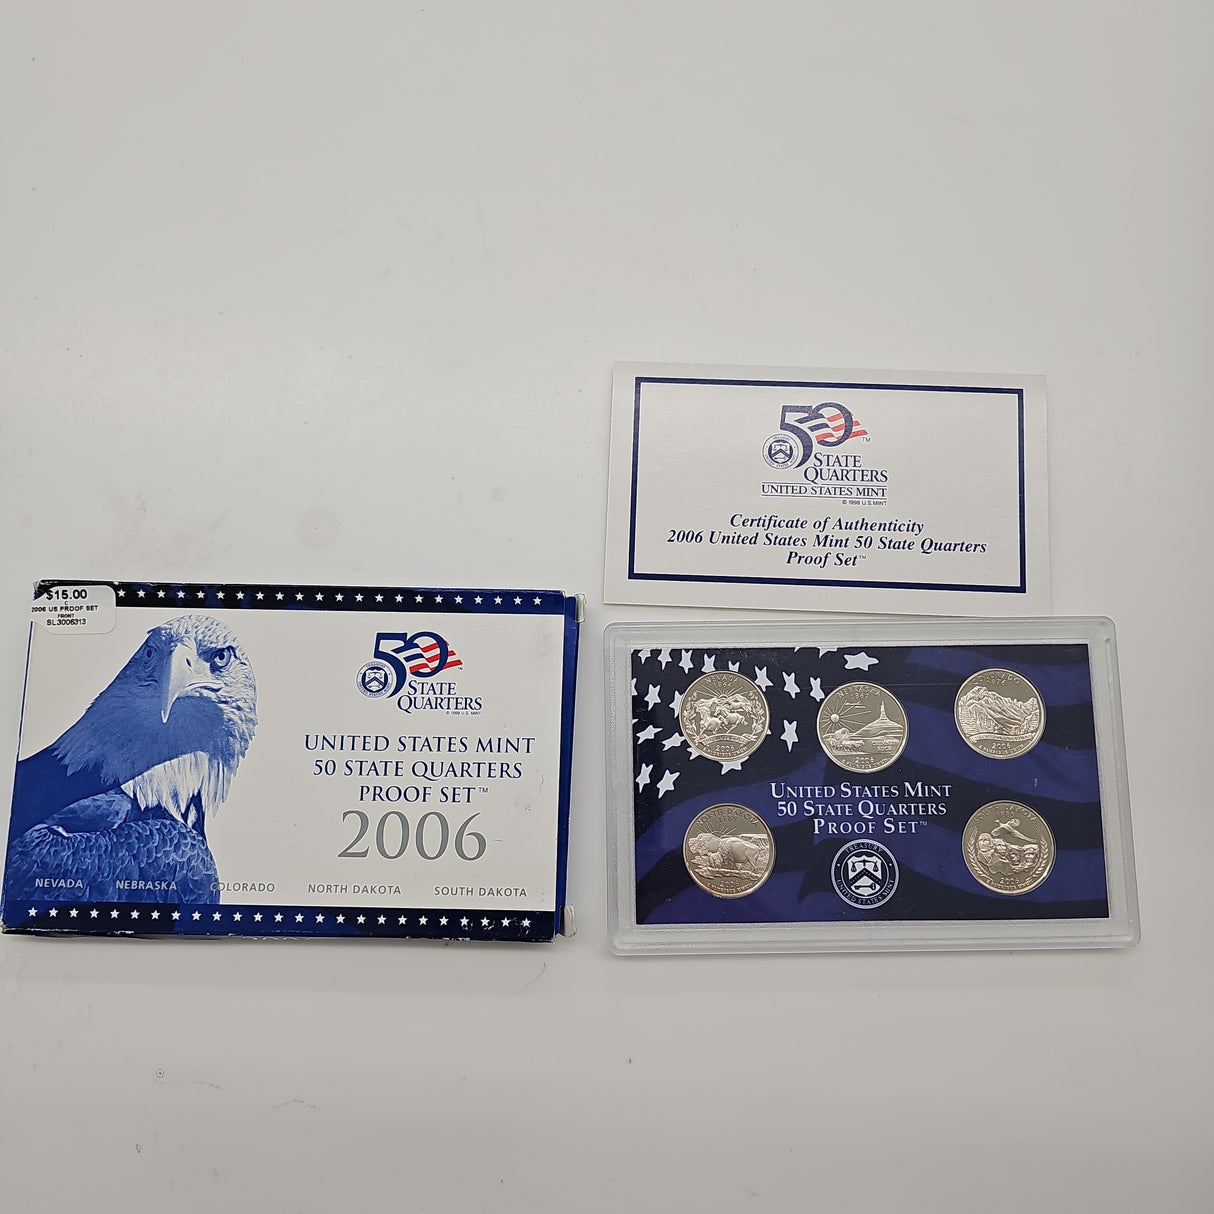 2006 United States Mint 50 State Quarters Proof Set (5 Coins)